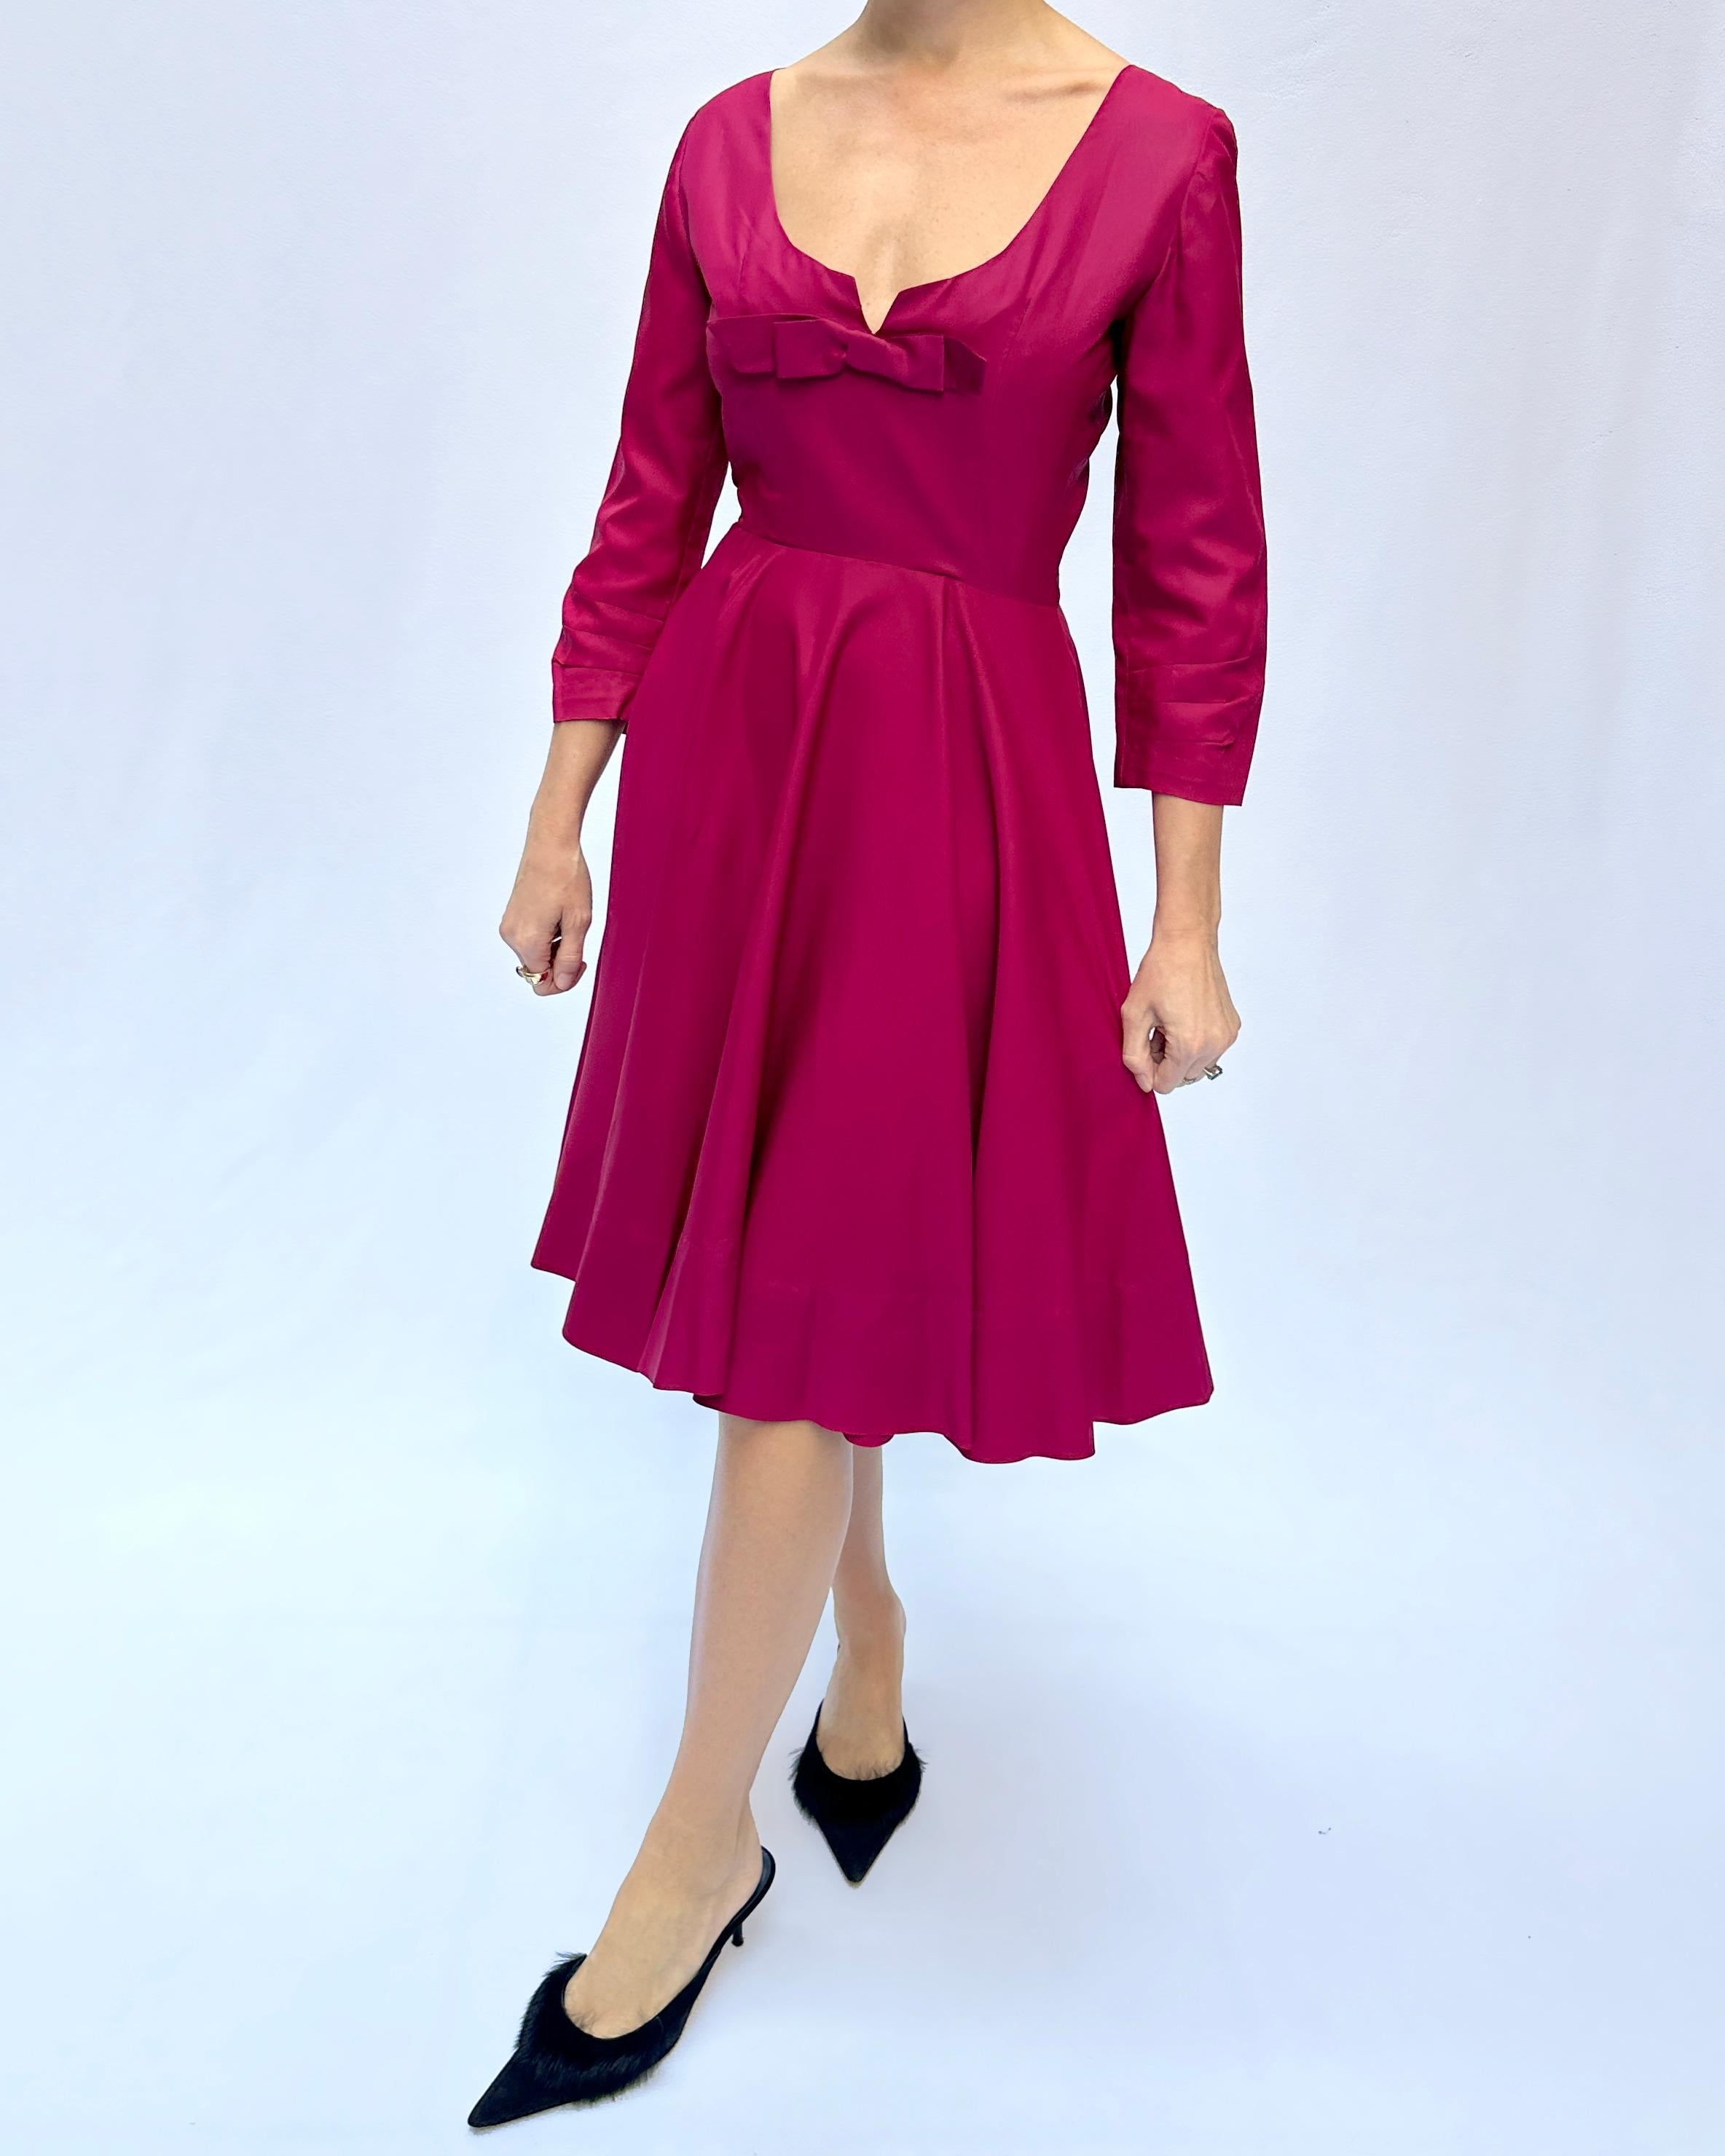 This vintage fit-and-flare dress was custom made in the late 1940s/early 1950s and features the most flattering fit, a nod to Christian Dior's 